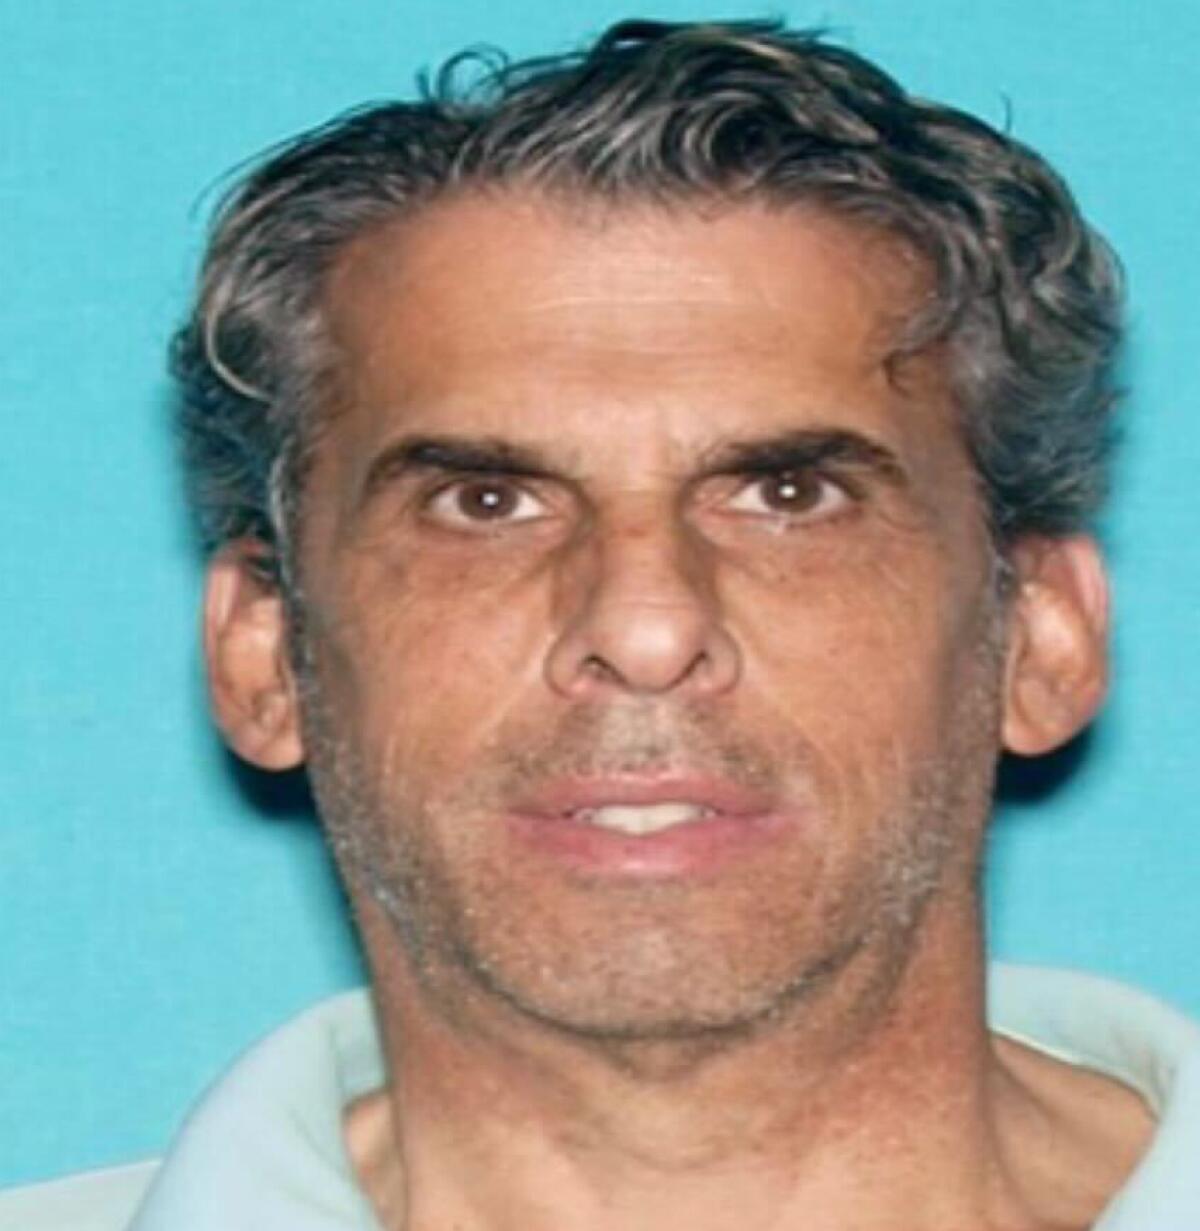 A photo of Eric Weinberg released by Los Angeles police after his arrest on suspicion of multiple counts of sexual assault.